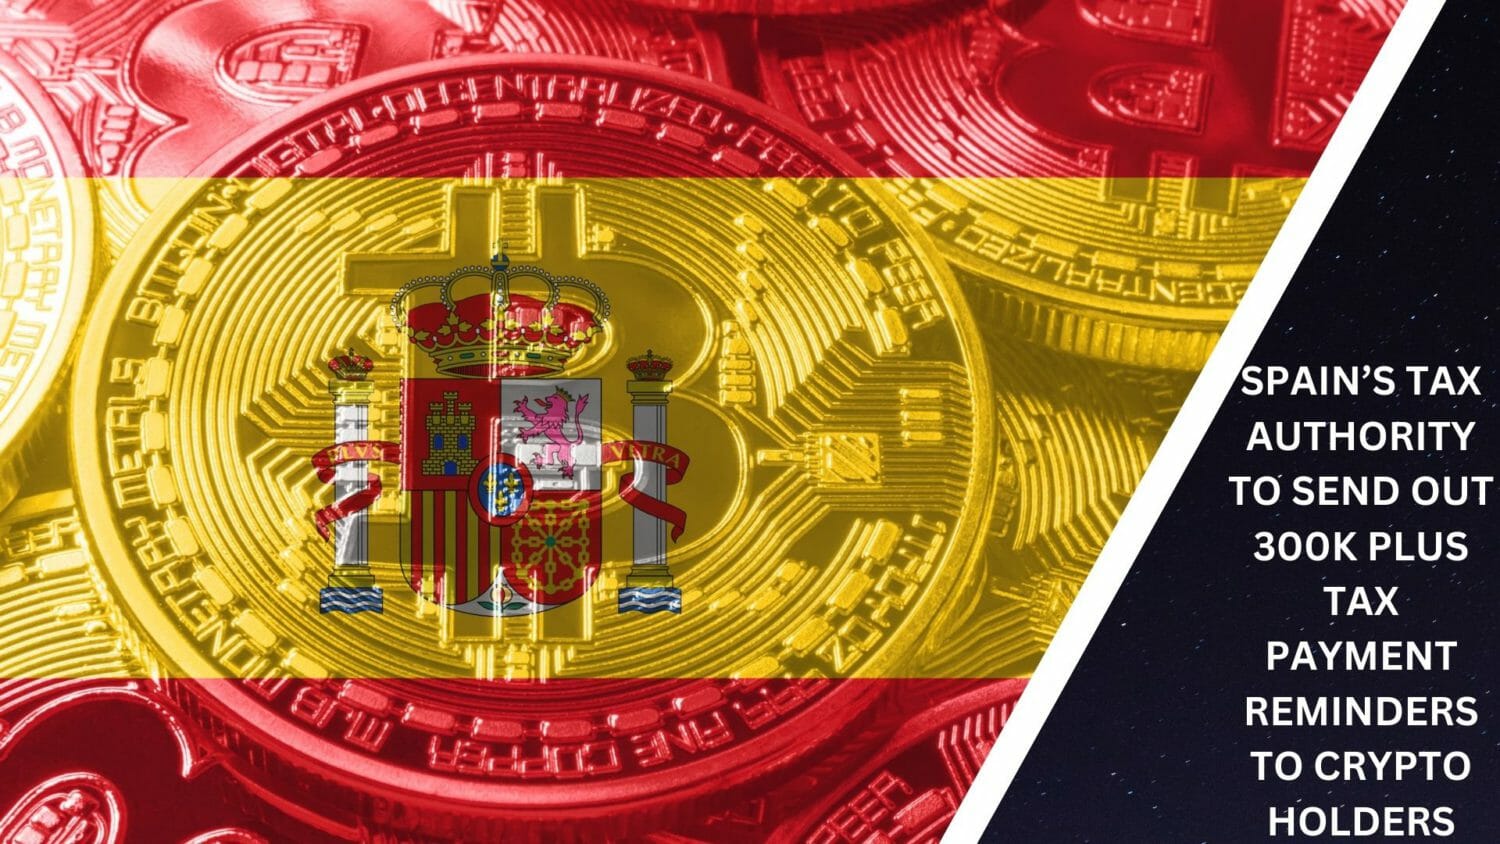 Spain’s Tax Authority To Send Out 300K Plus Tax Payment Reminders To Crypto Holders